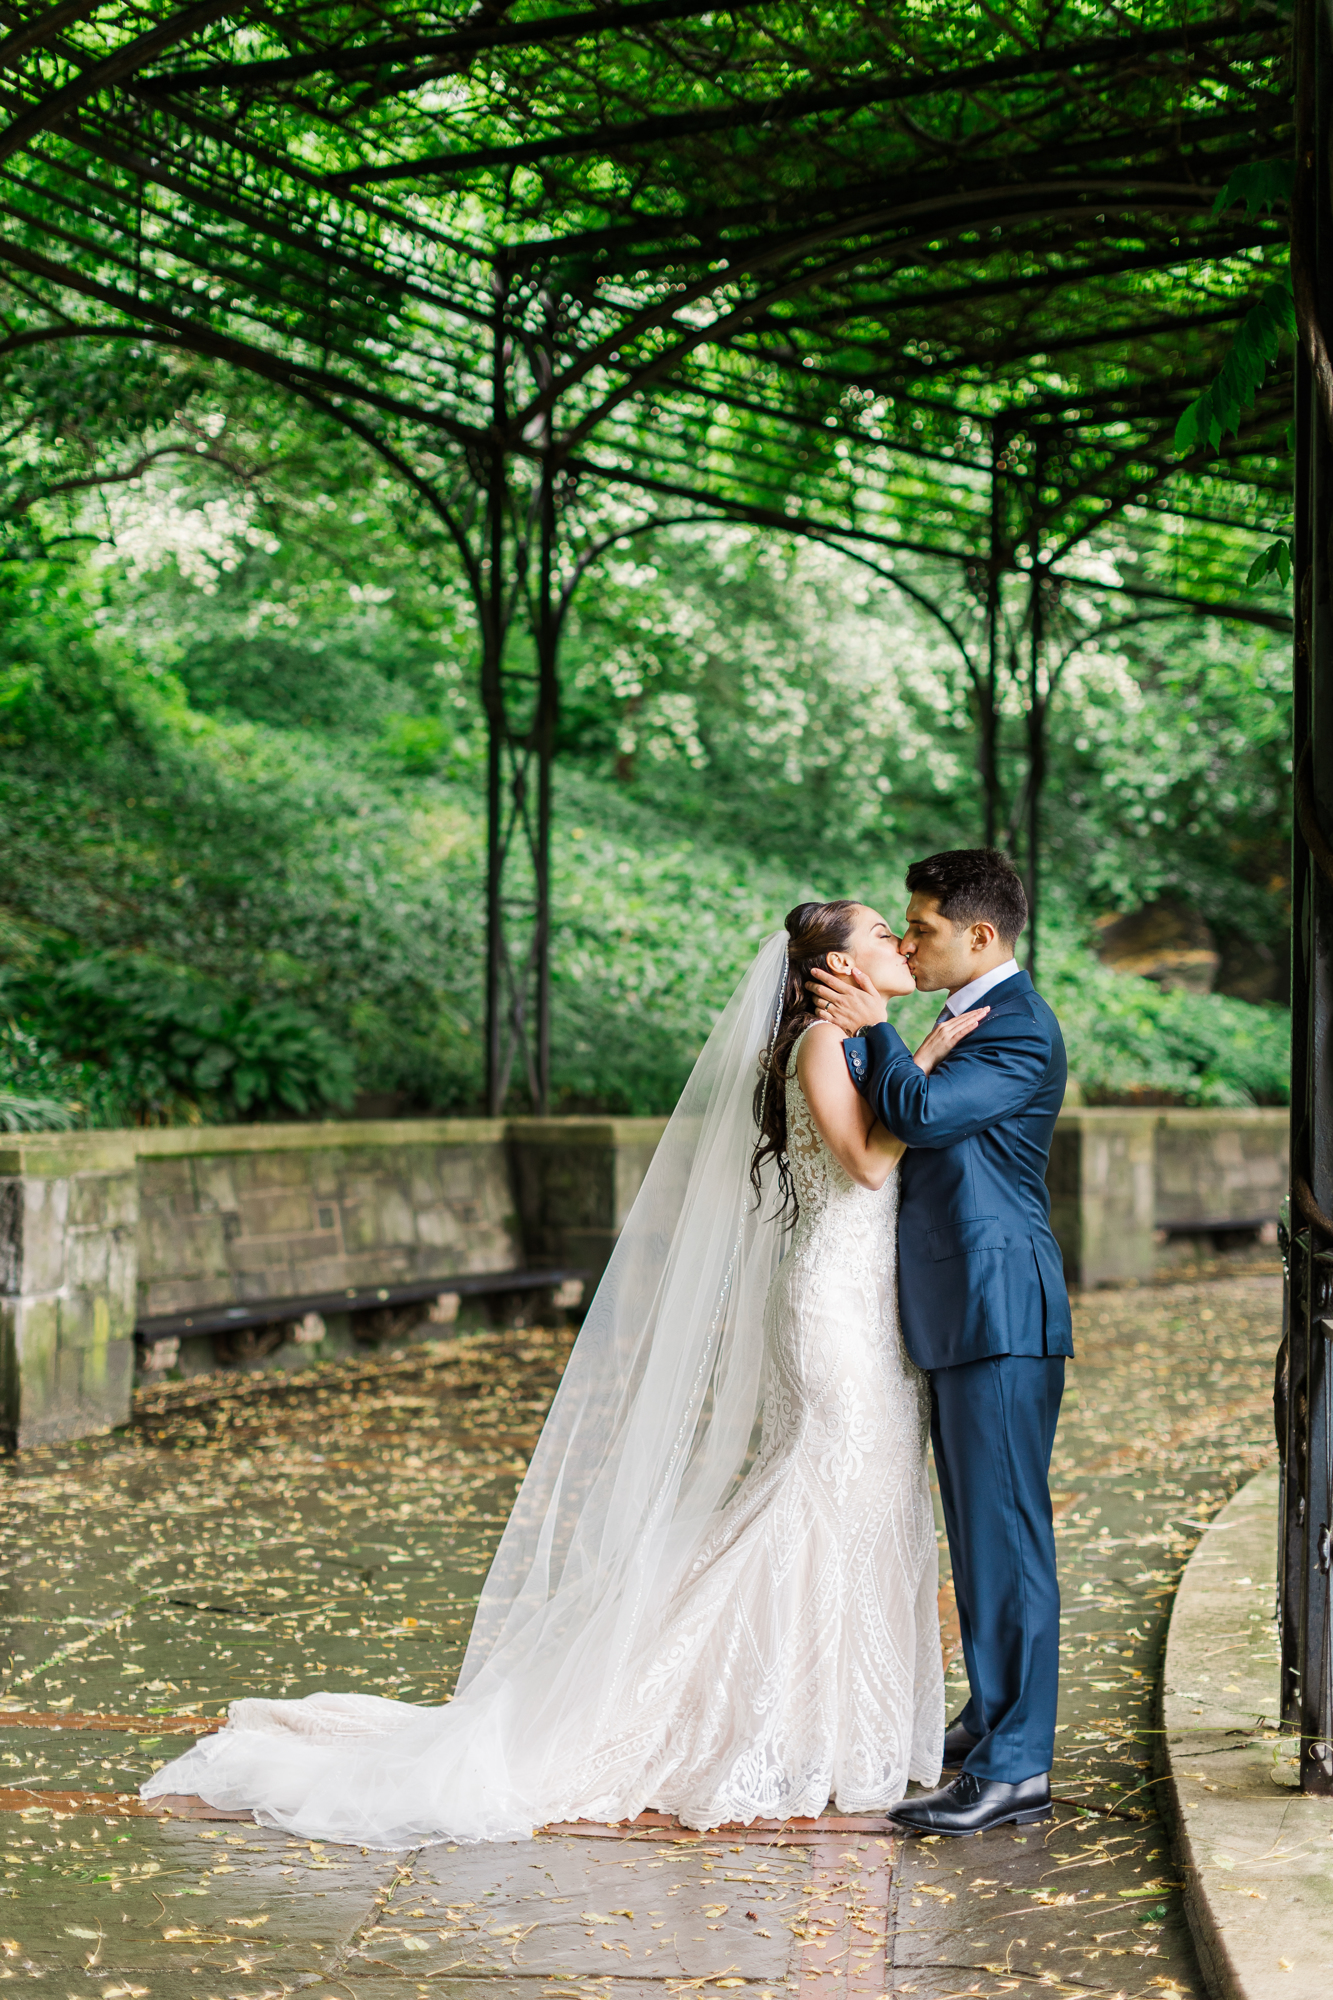 Jaw-Dropping Conservatory Garden Elopement